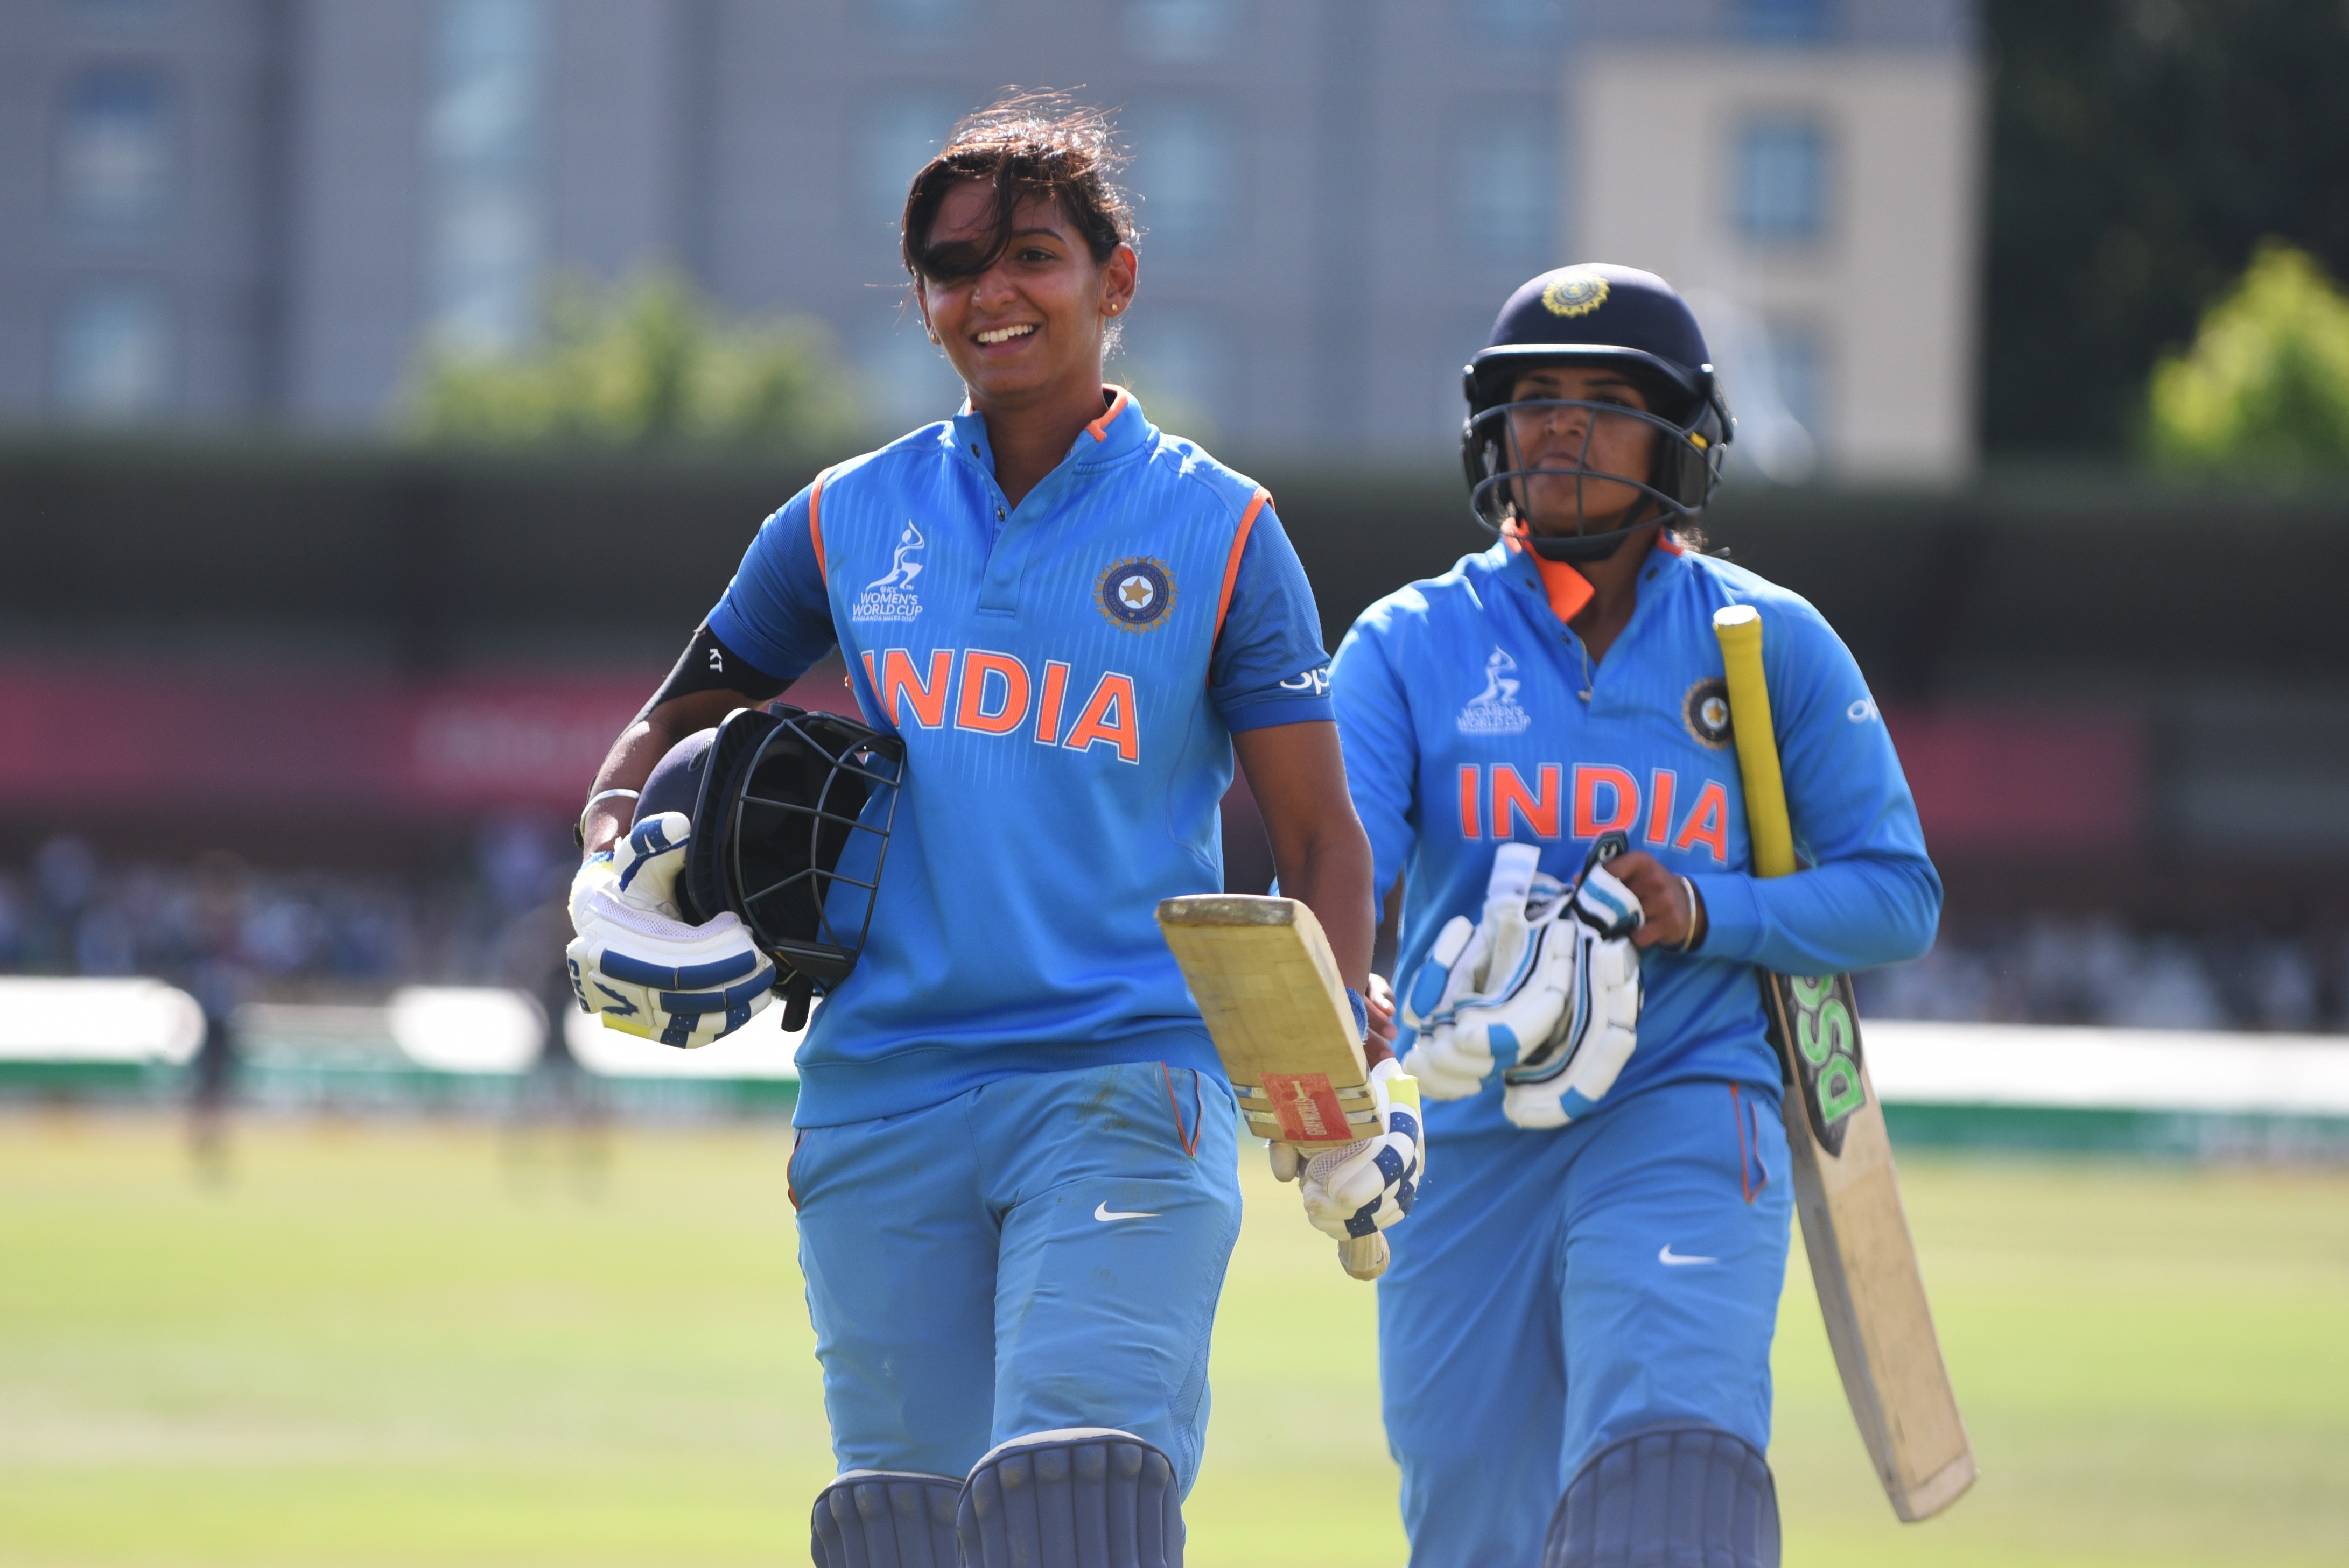 ENG W vs IND W | Middle-order batters need just one good game to soar back into form, asserts Jhulan Goswami